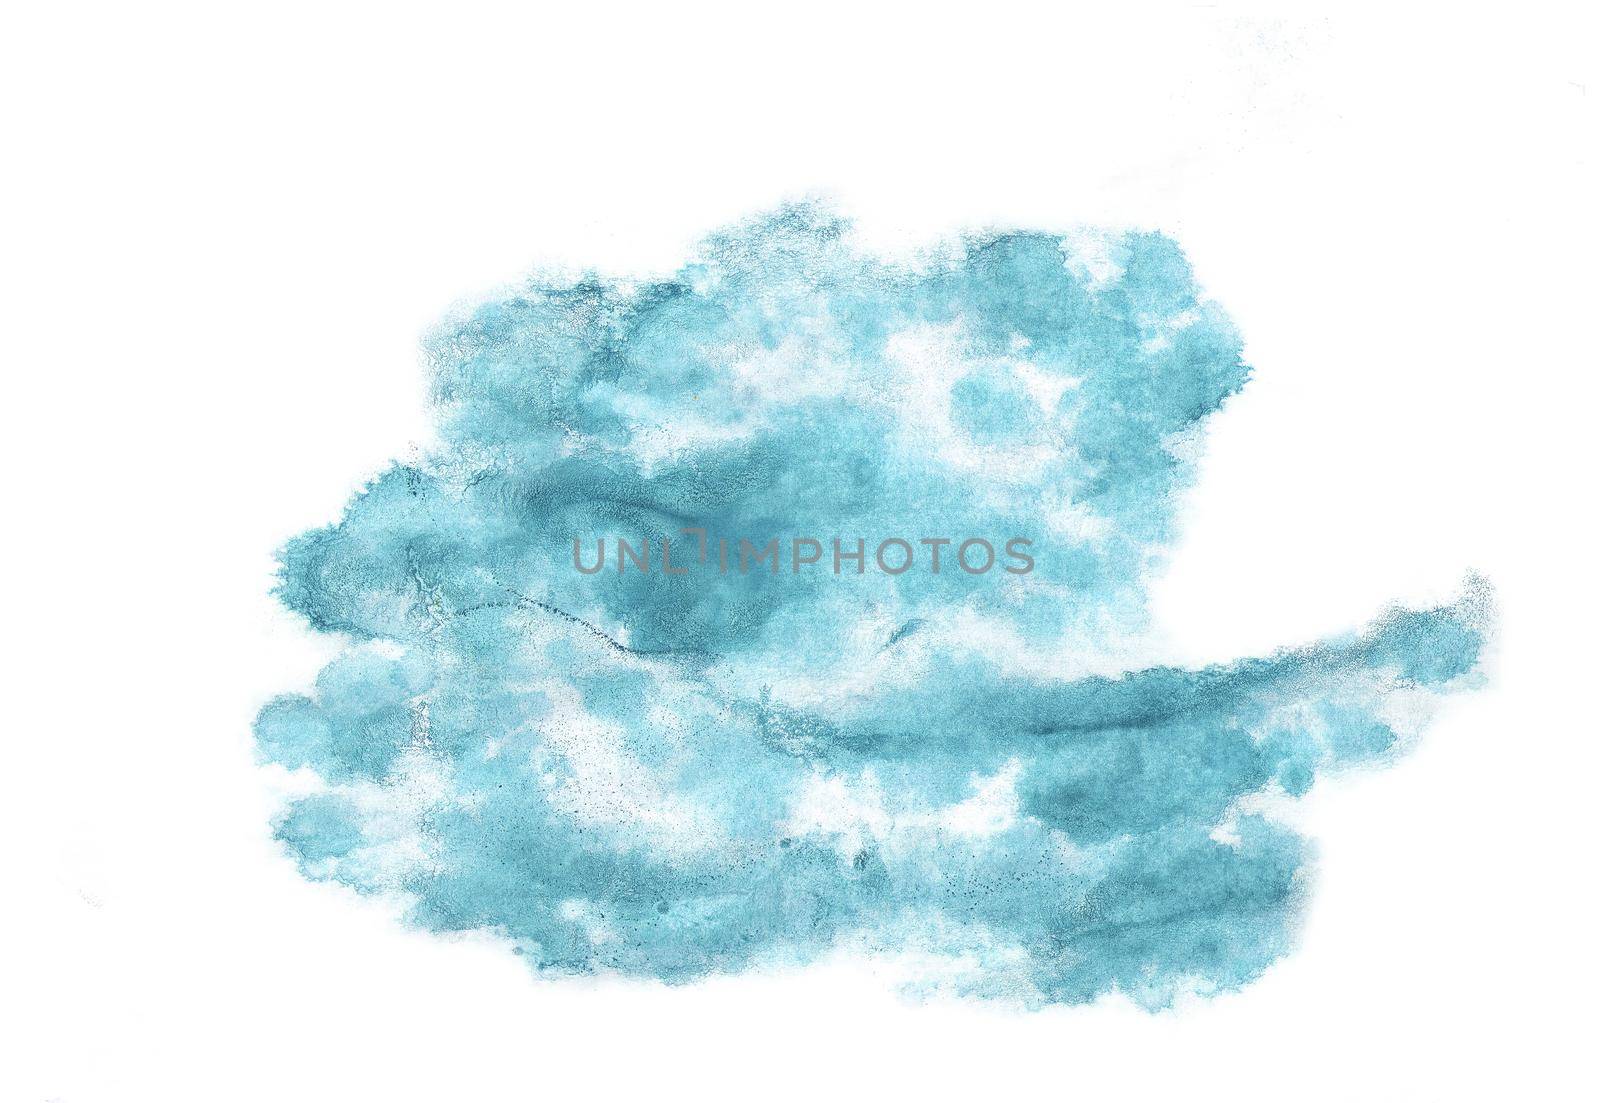 bstract blue watercolor cloud on a white background. Stock illustration for posters, postcards, banners and creative design.